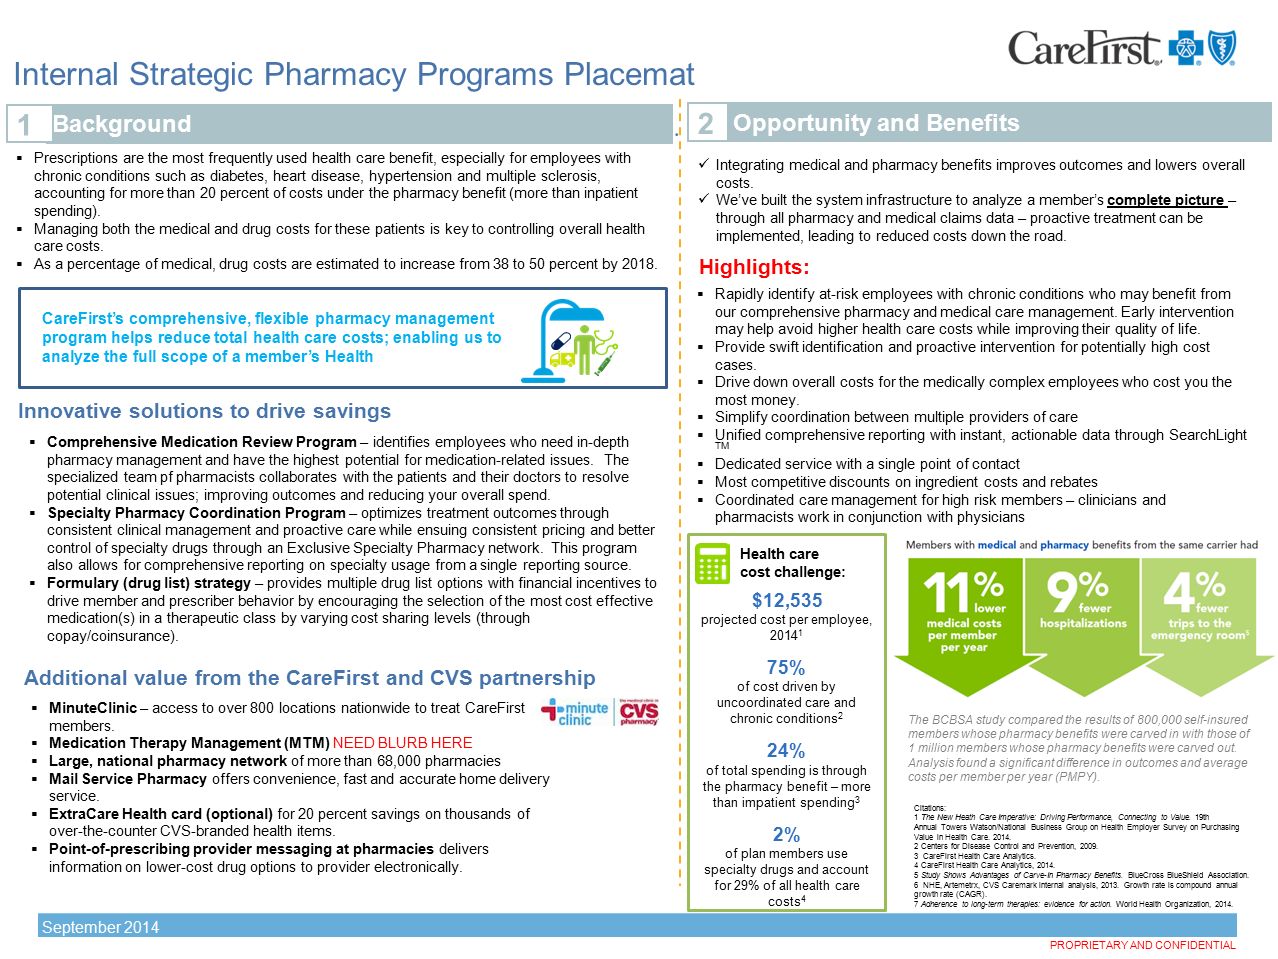 Exclusive specialty pharmacy network carefirst cognizant software engineer salary